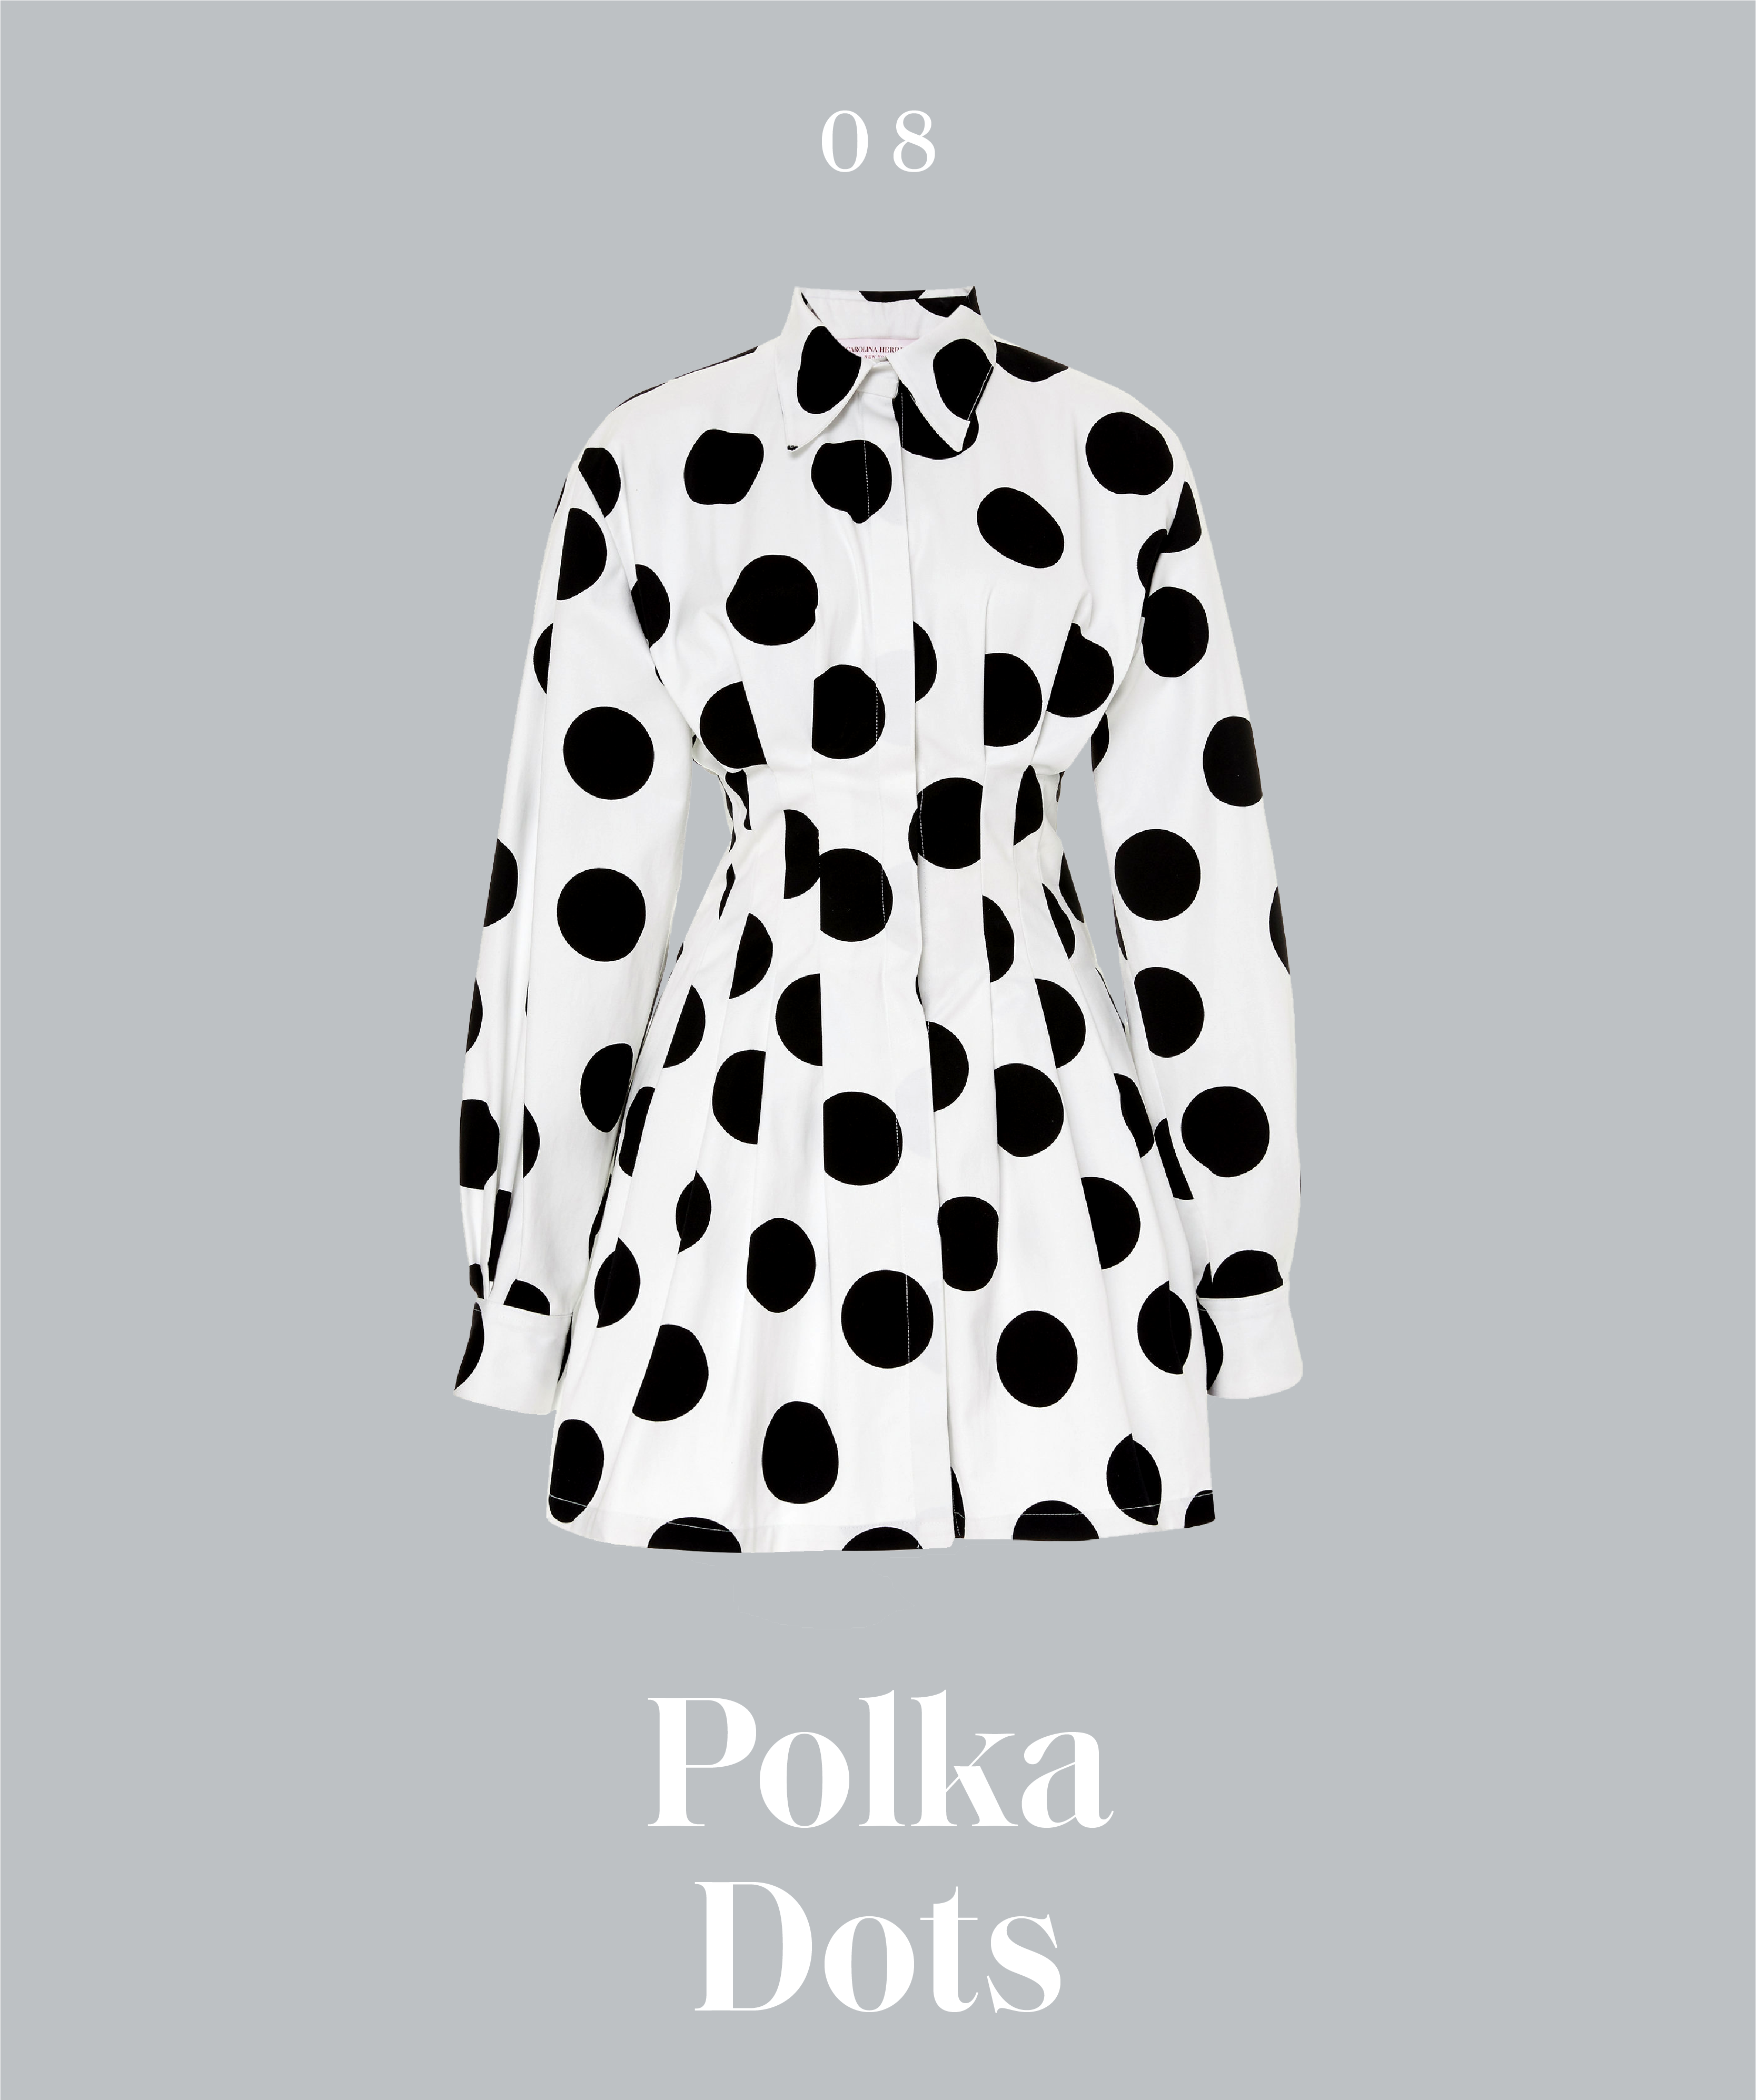 Pattern, Font, Design, Illustration, Polka dot, Black-and-white, Outerwear, Pattern, Non-Sporting Group, Sleeve, 